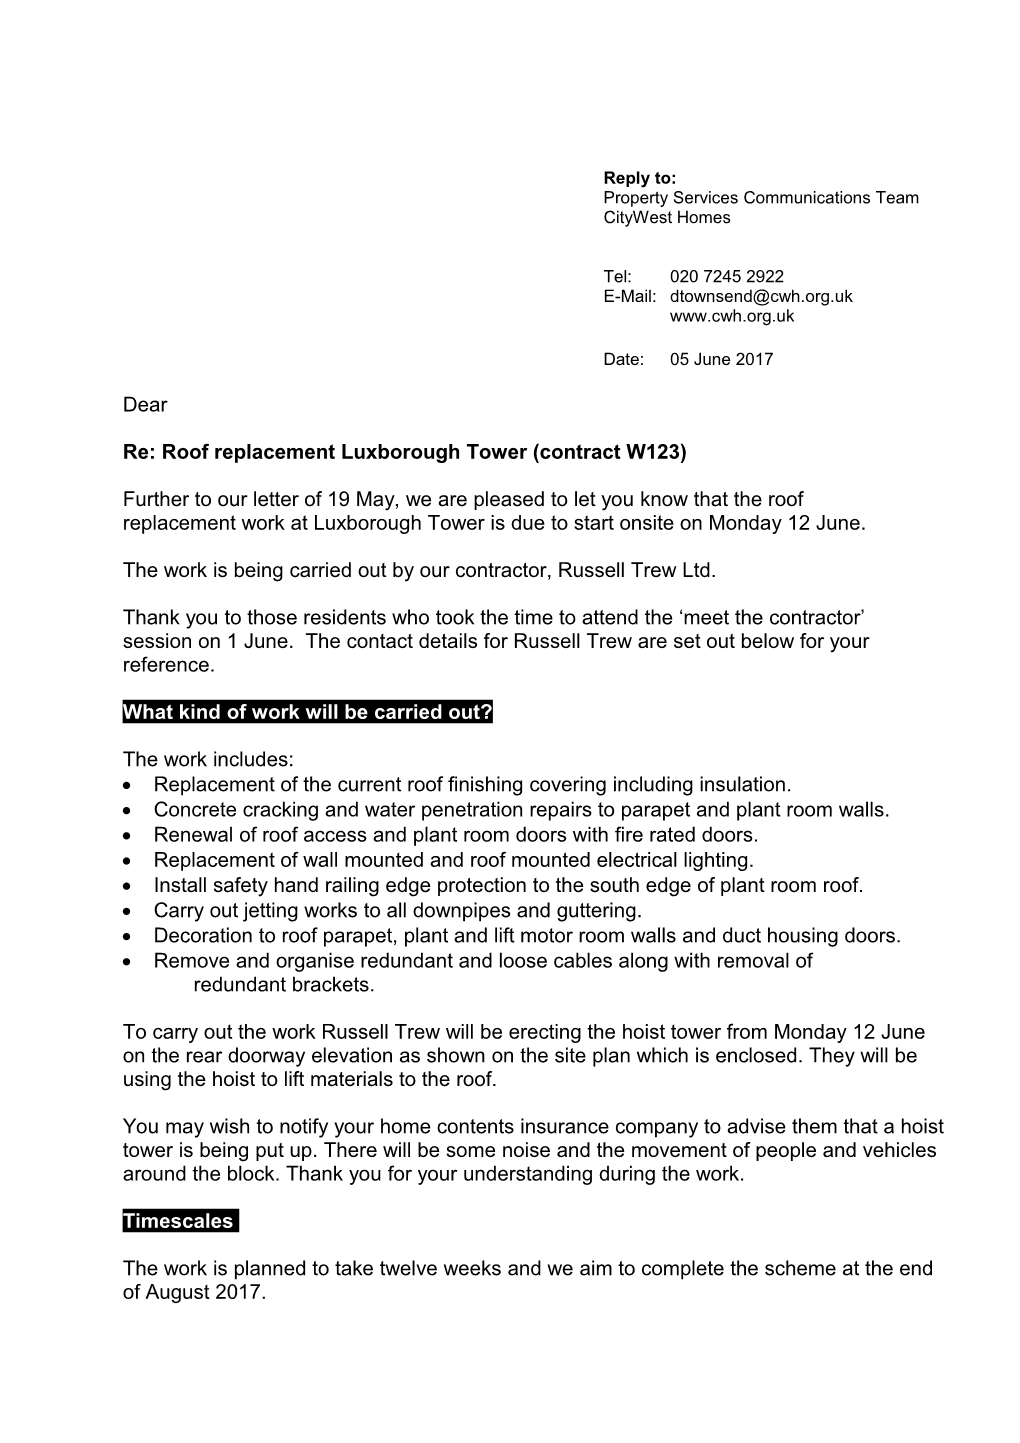 Re: Roof Replacement Luxborough Tower (Contract W123)